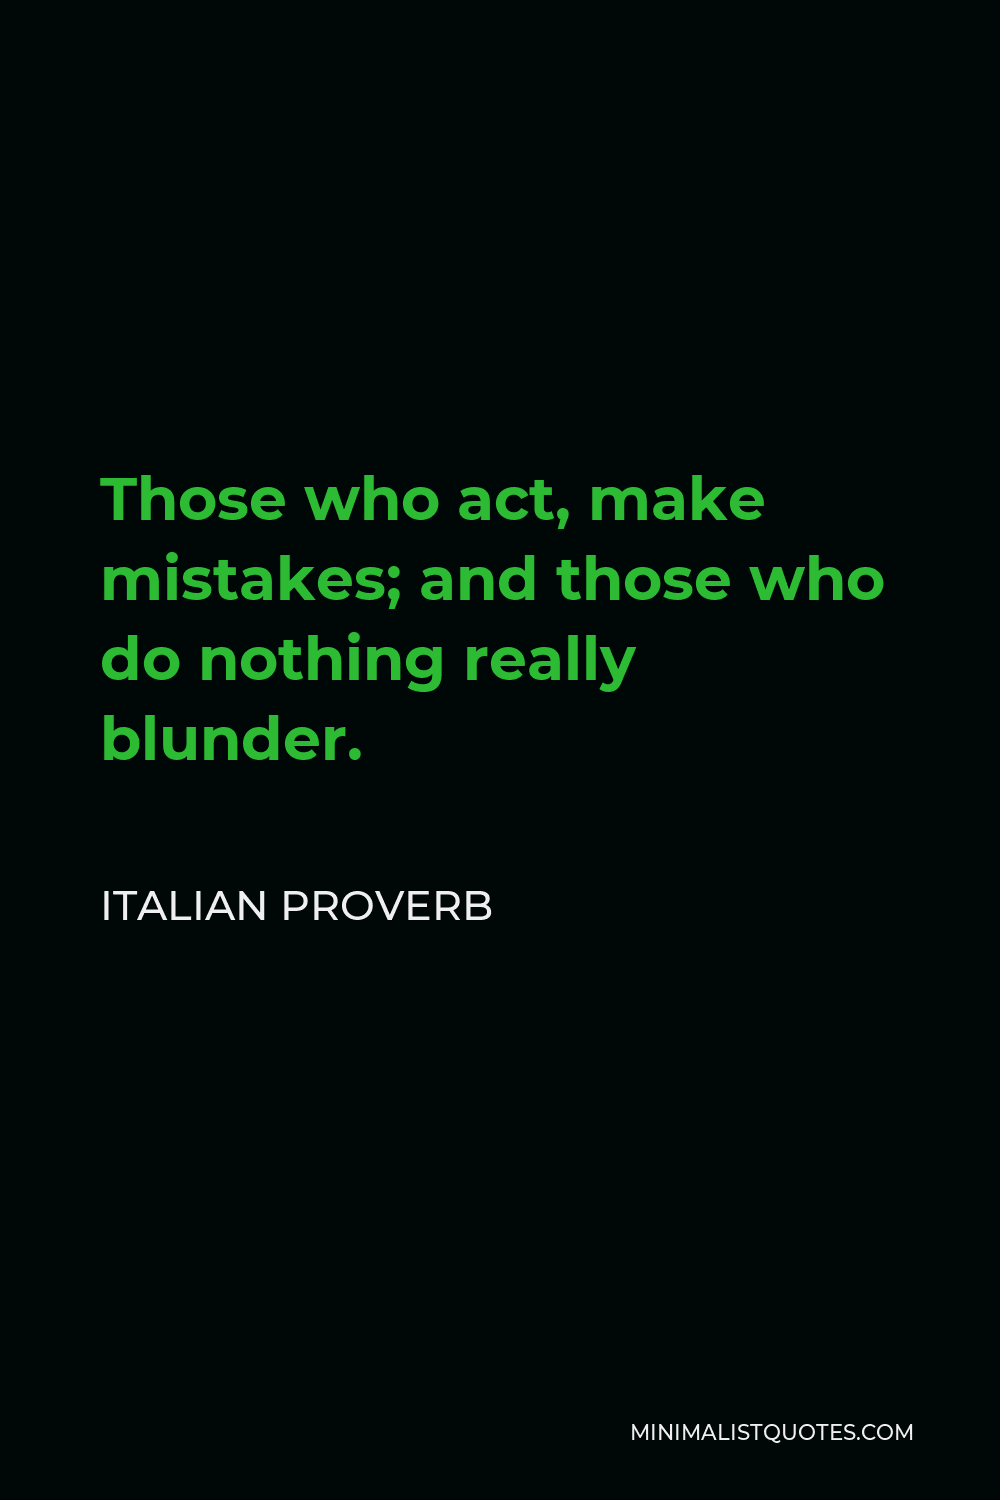 Italian Proverb Quote - Those who act, make mistakes; and those who do nothing really blunder.